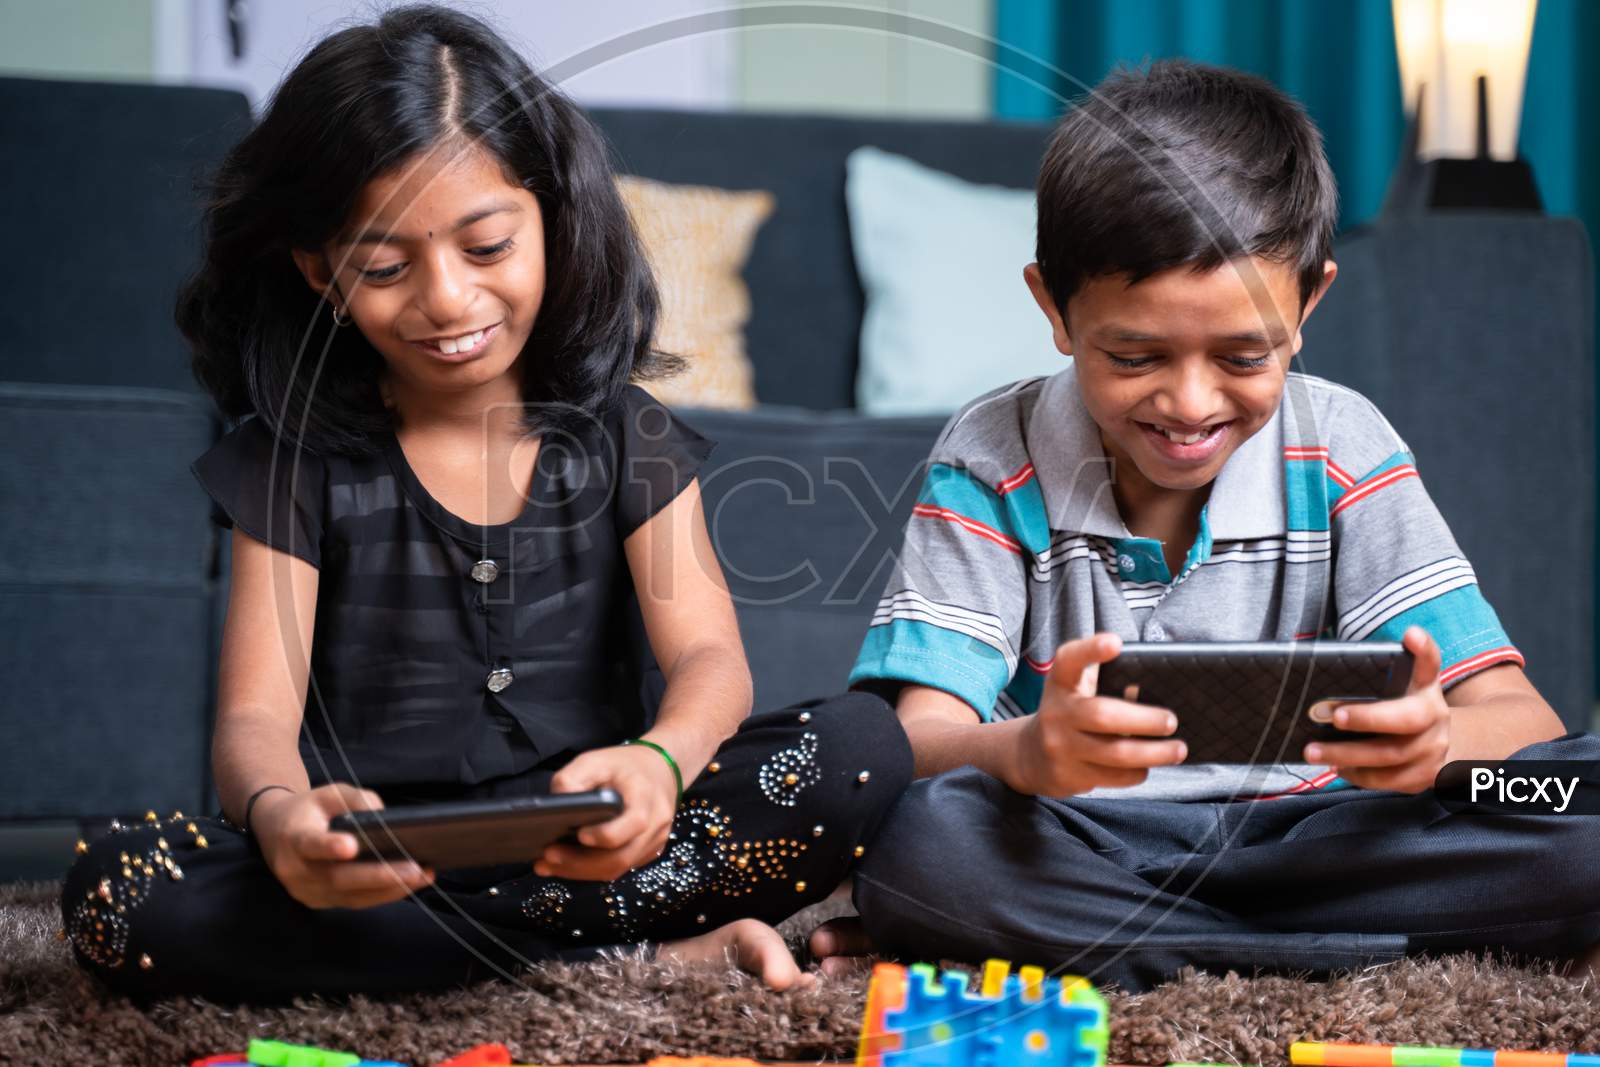 Two Young Sibling Kids Playing Online Video Game On Mobile Phone At Home - Concept Of Smartphone Game Addiction. Holidays, Modern Technology Lifestyle.